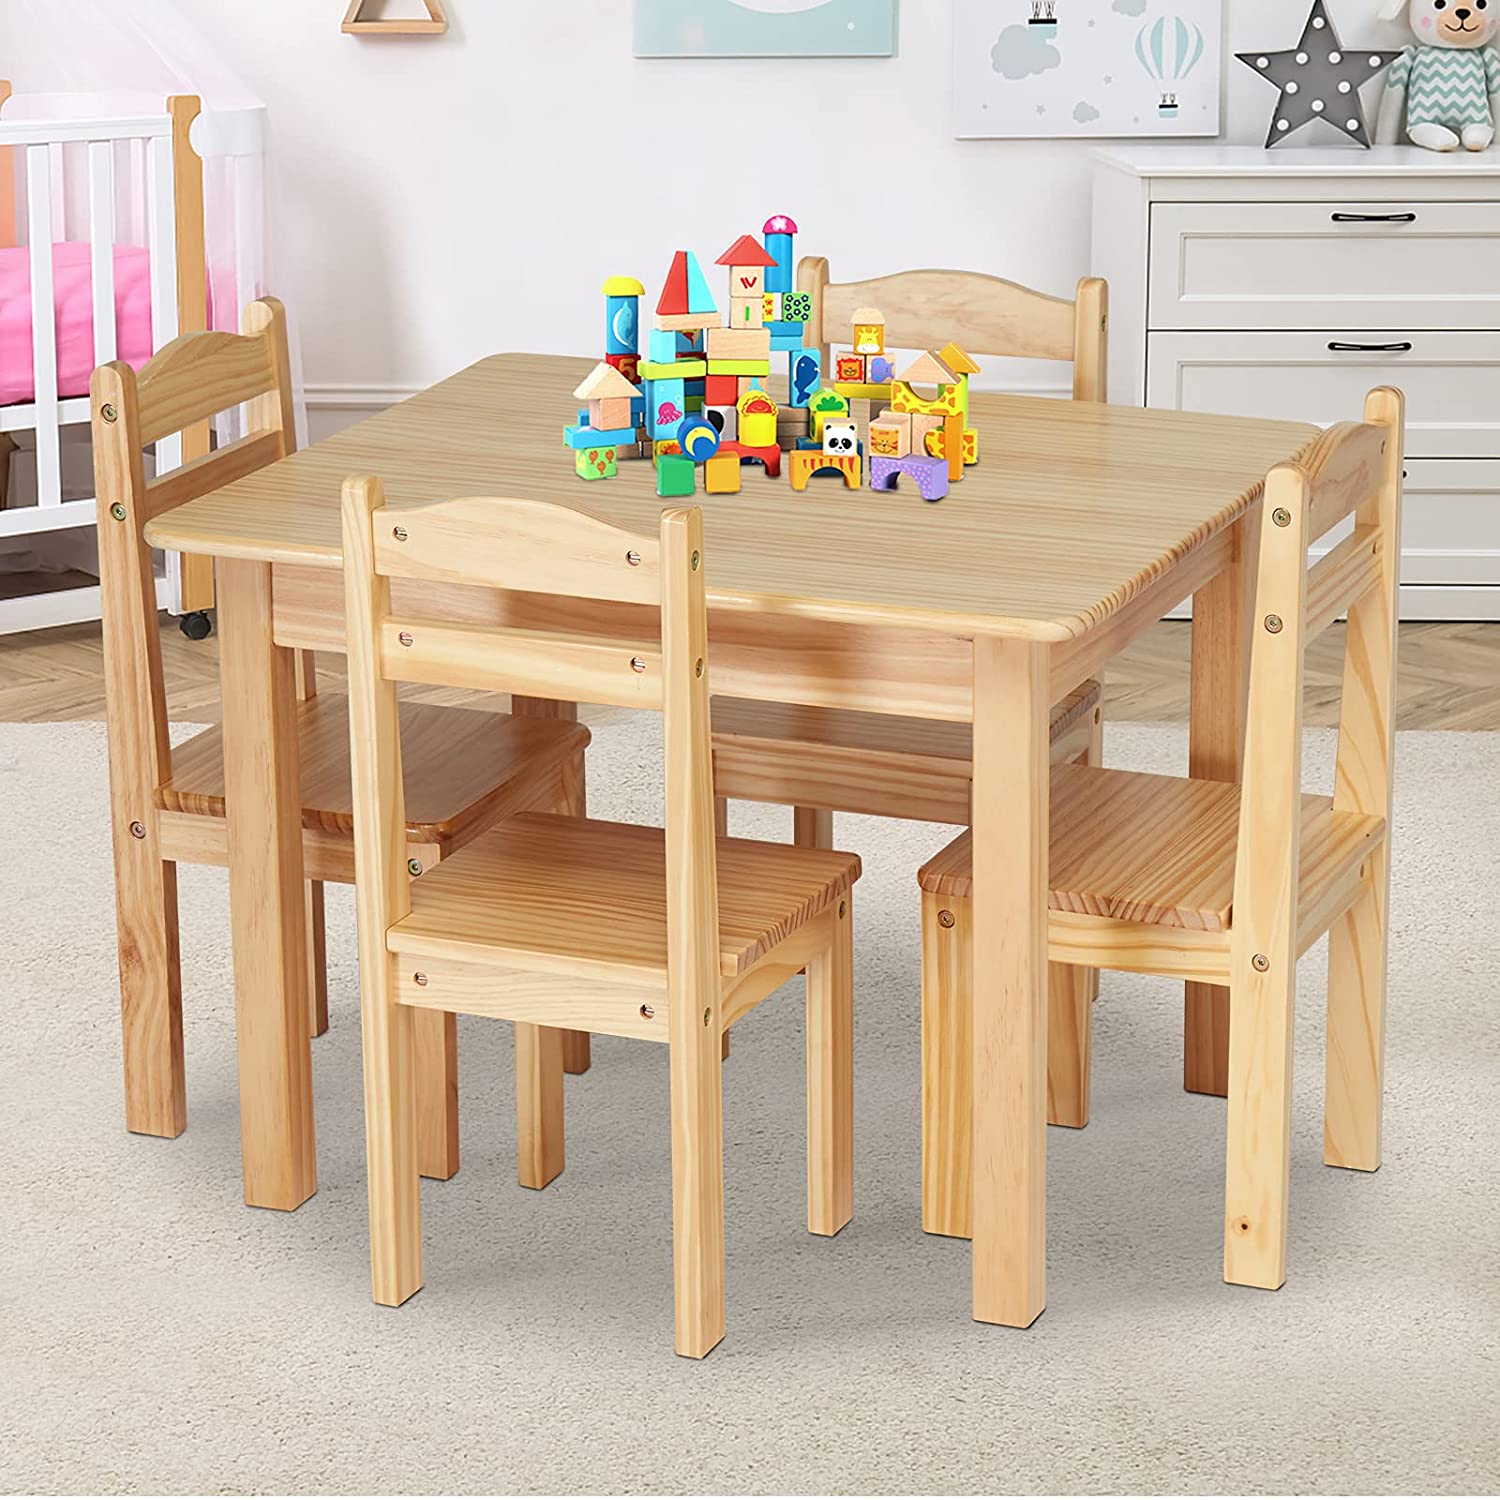 Kids Wooden Table and 4 Chairs Playroom Furniture Kindergarten Table